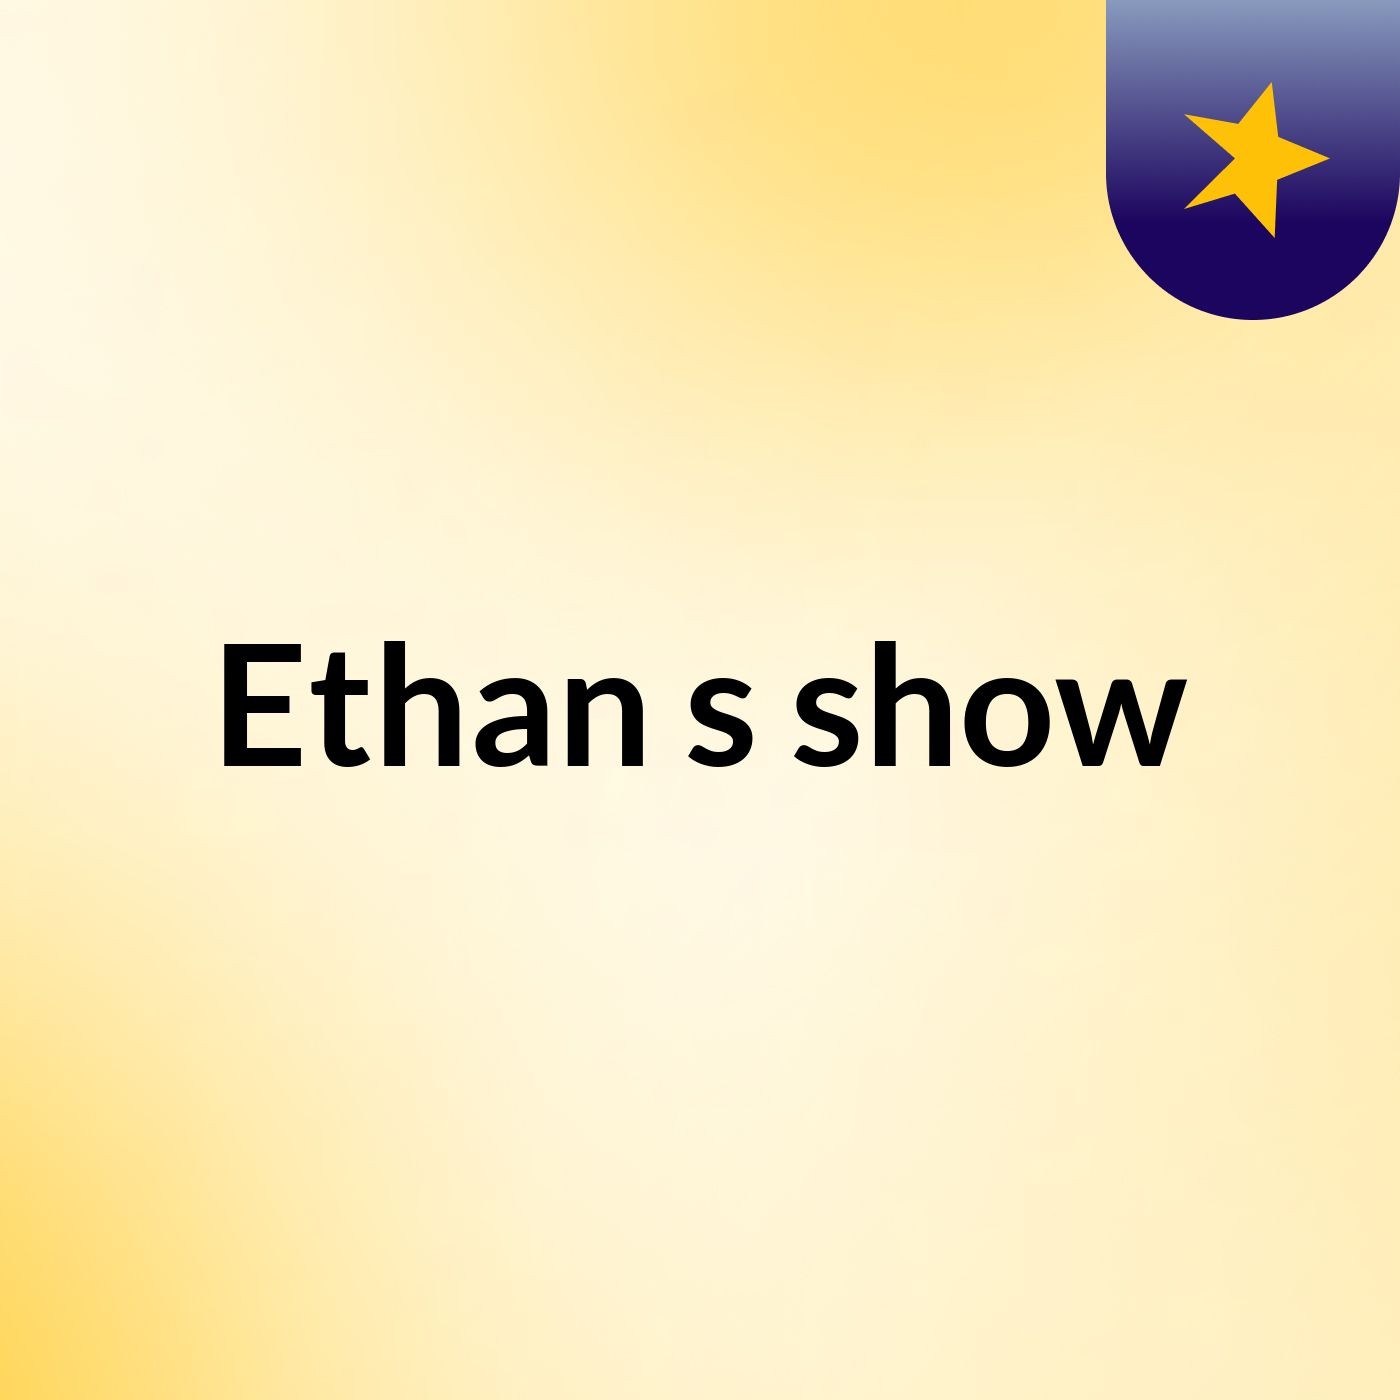 Ethan's show